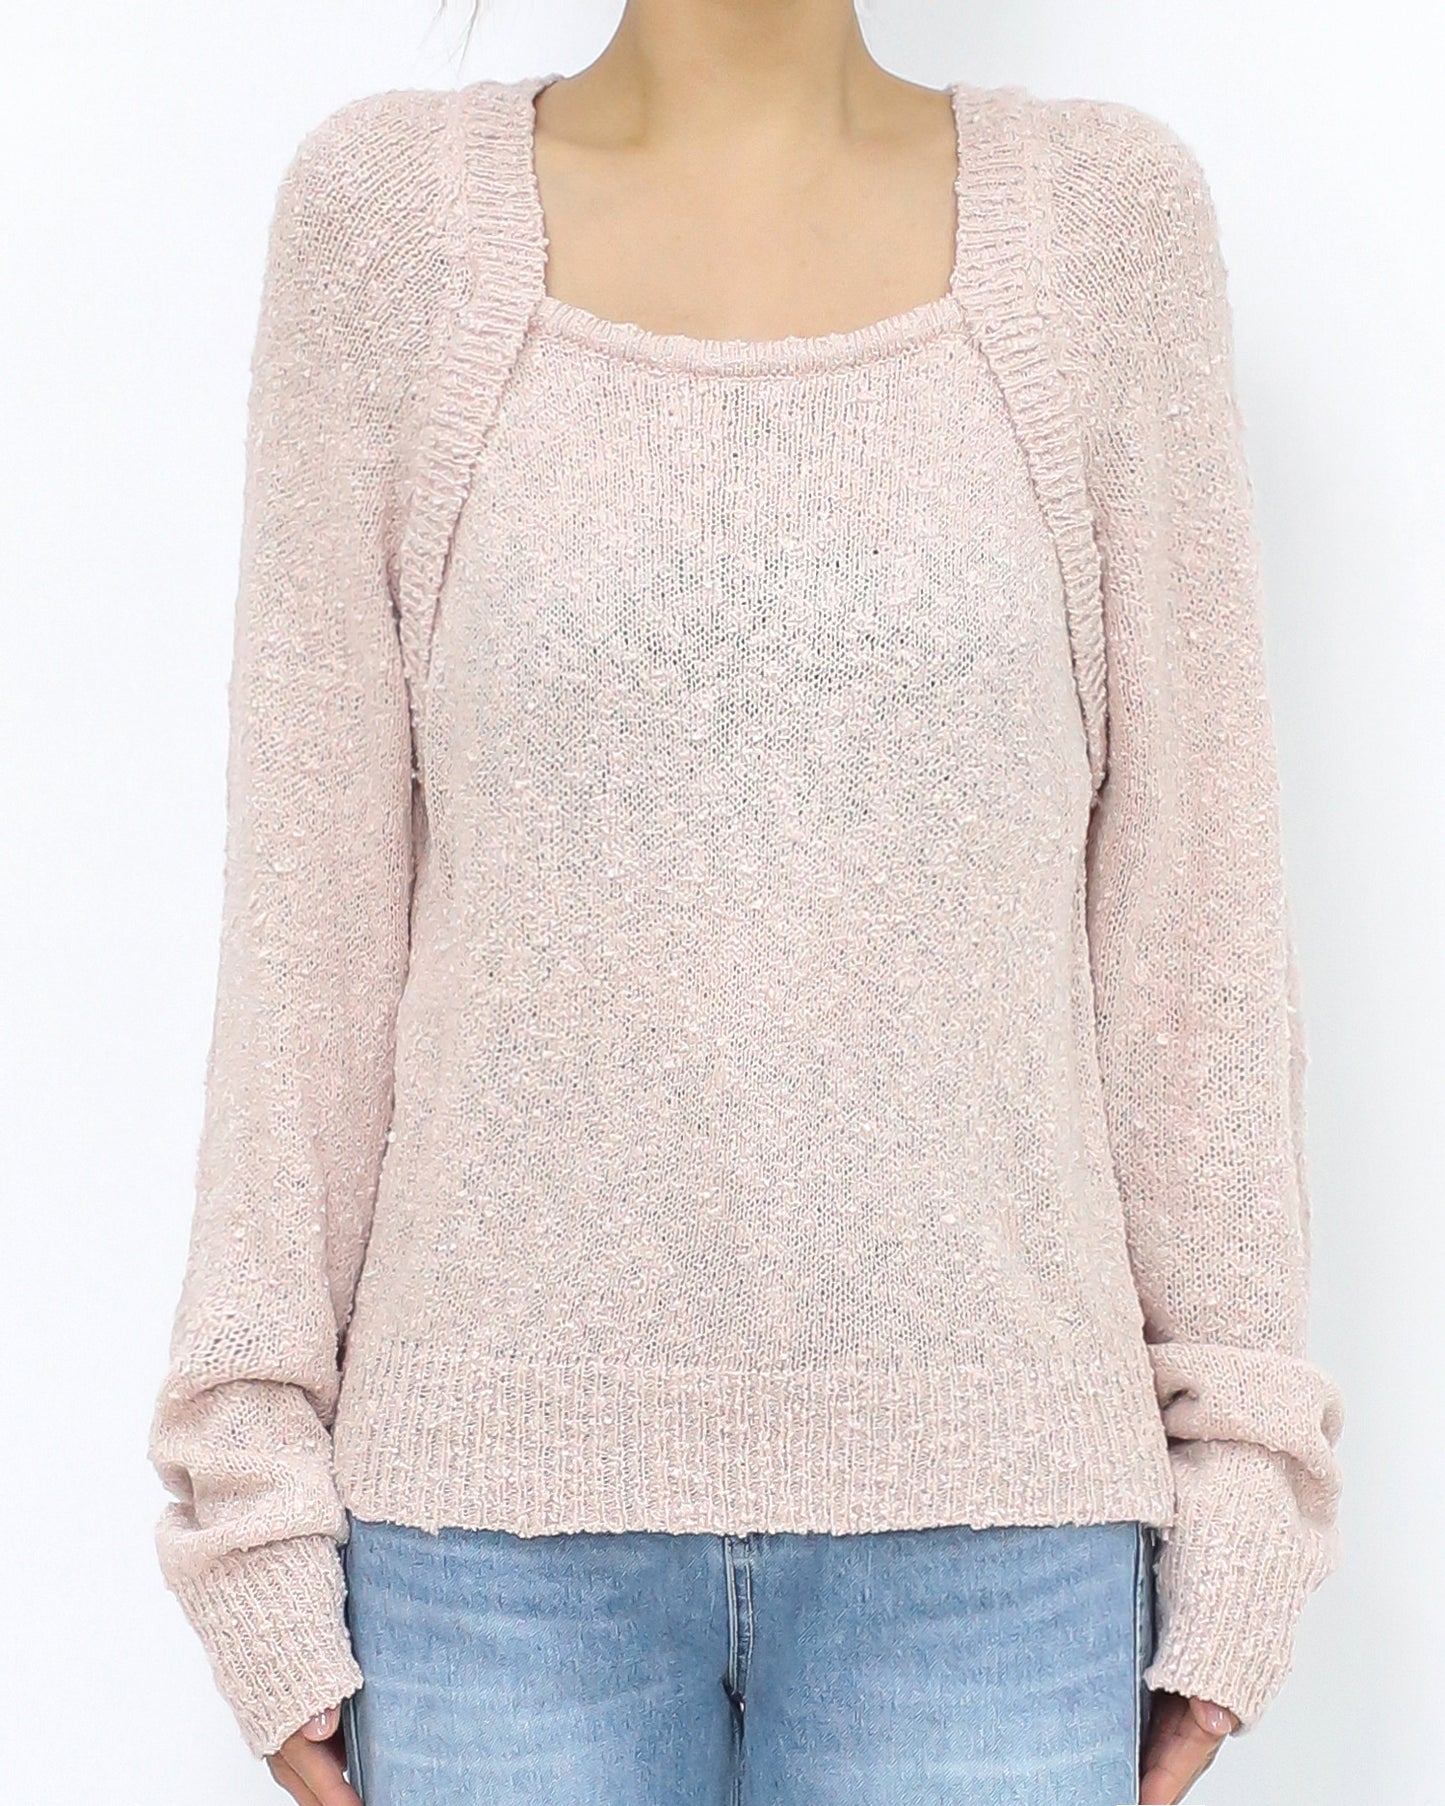 marl pink knitted top *pre-order*